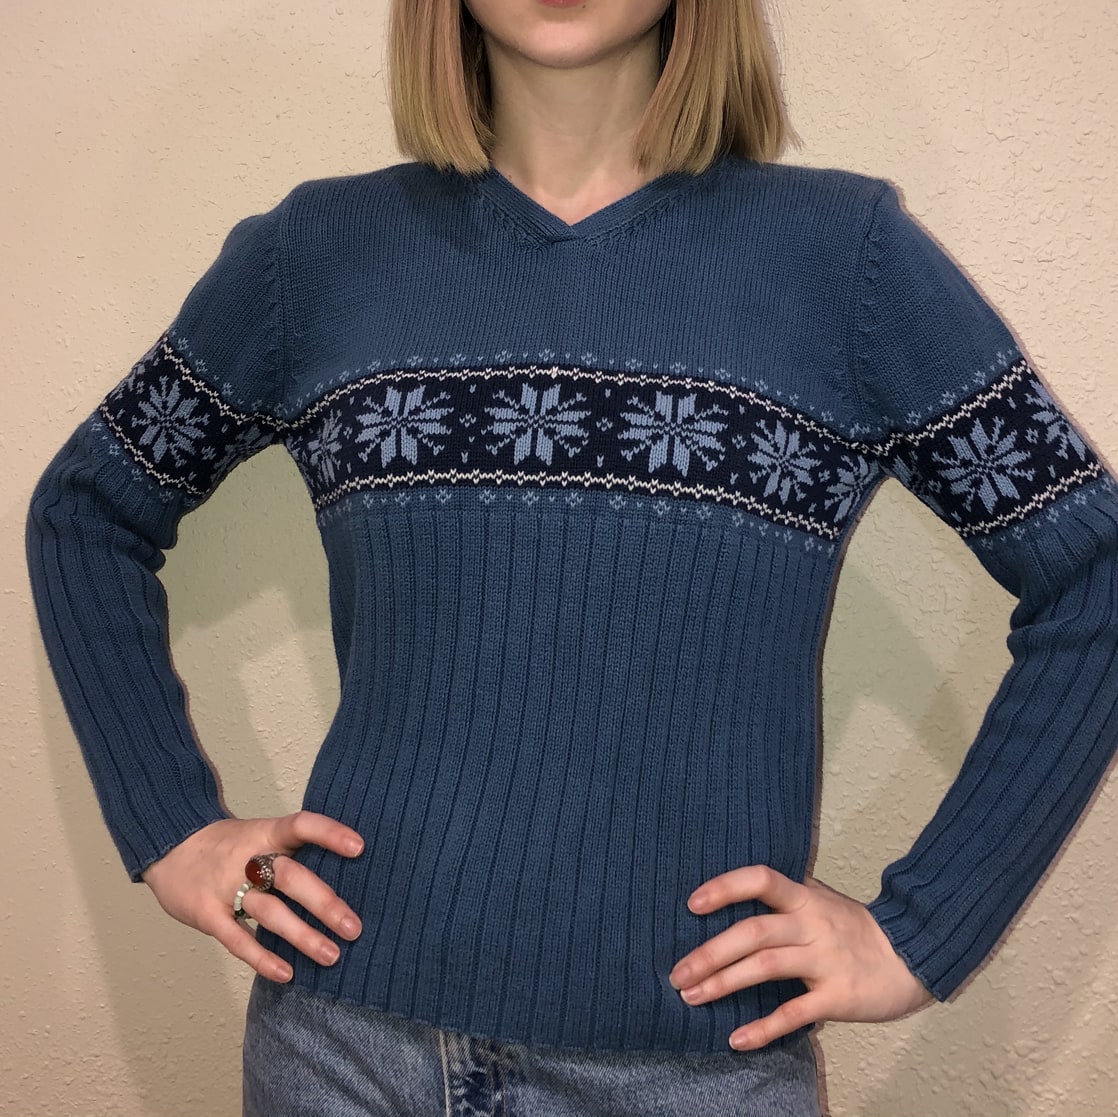 the Ski Girl sweater ❄️\nSize: fits a small...